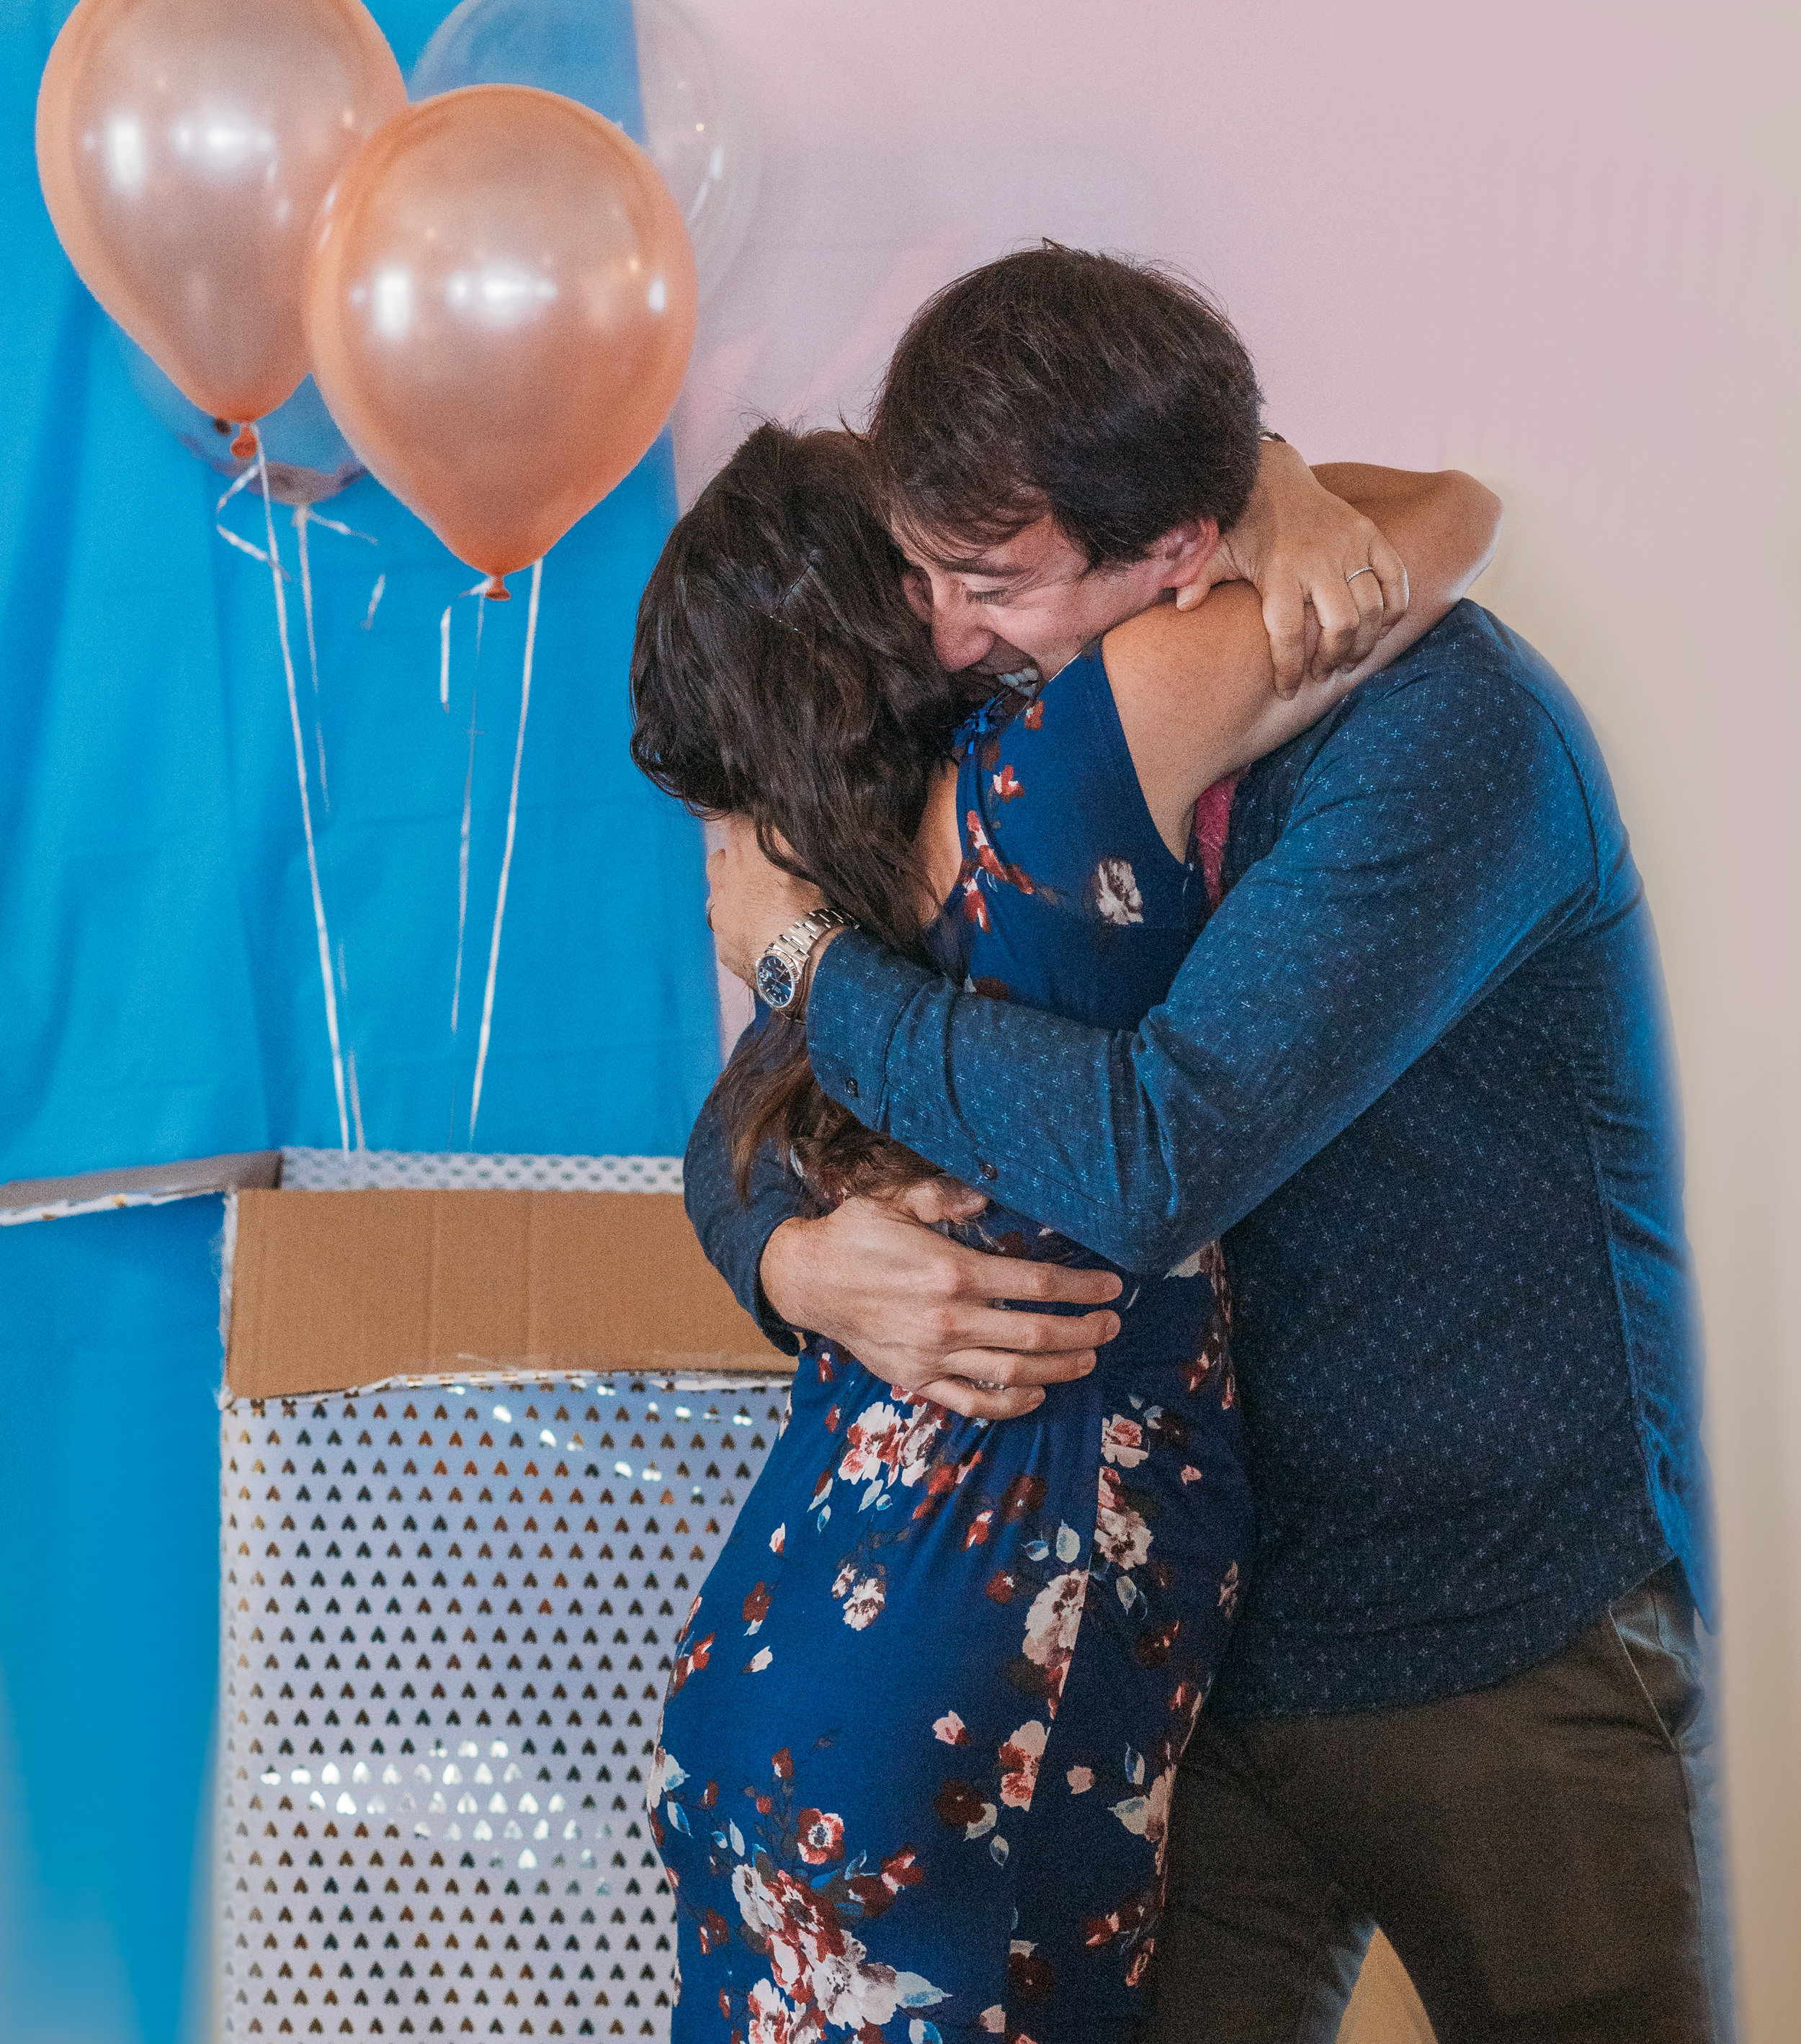 Gender Reveal Party Photography Session - Do's and Don'ts